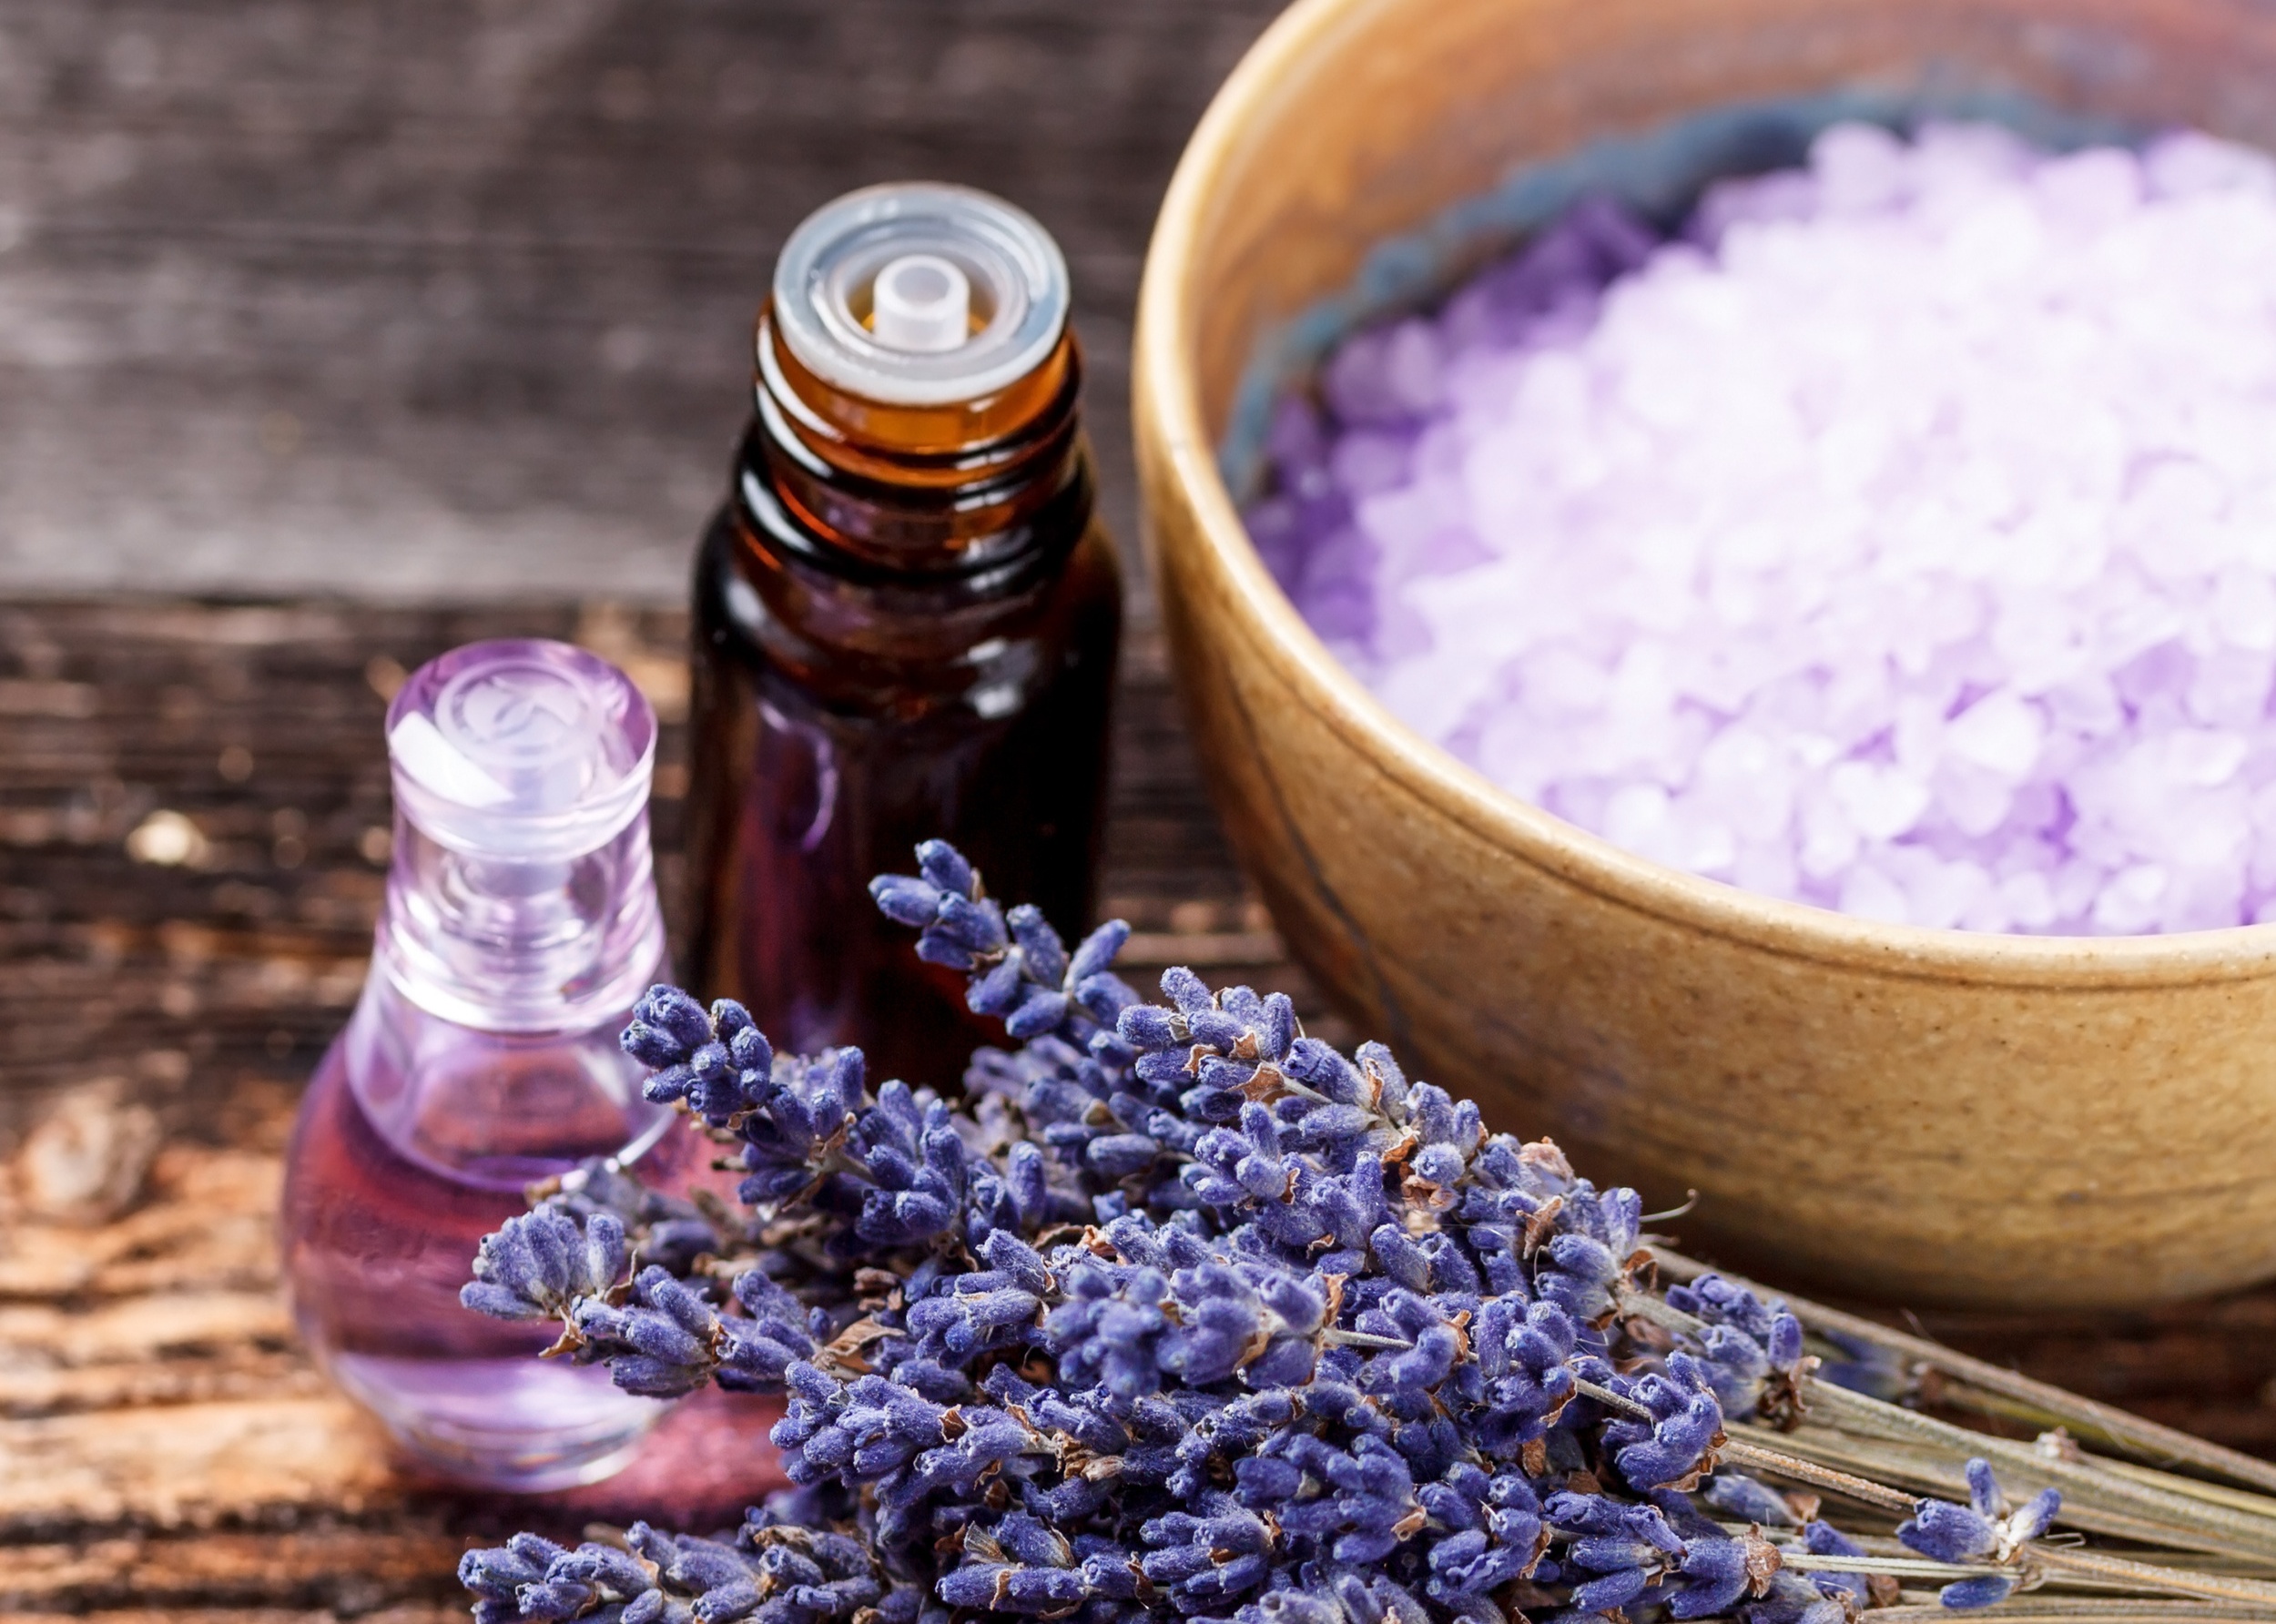 Why is lavender oil the most important oil?